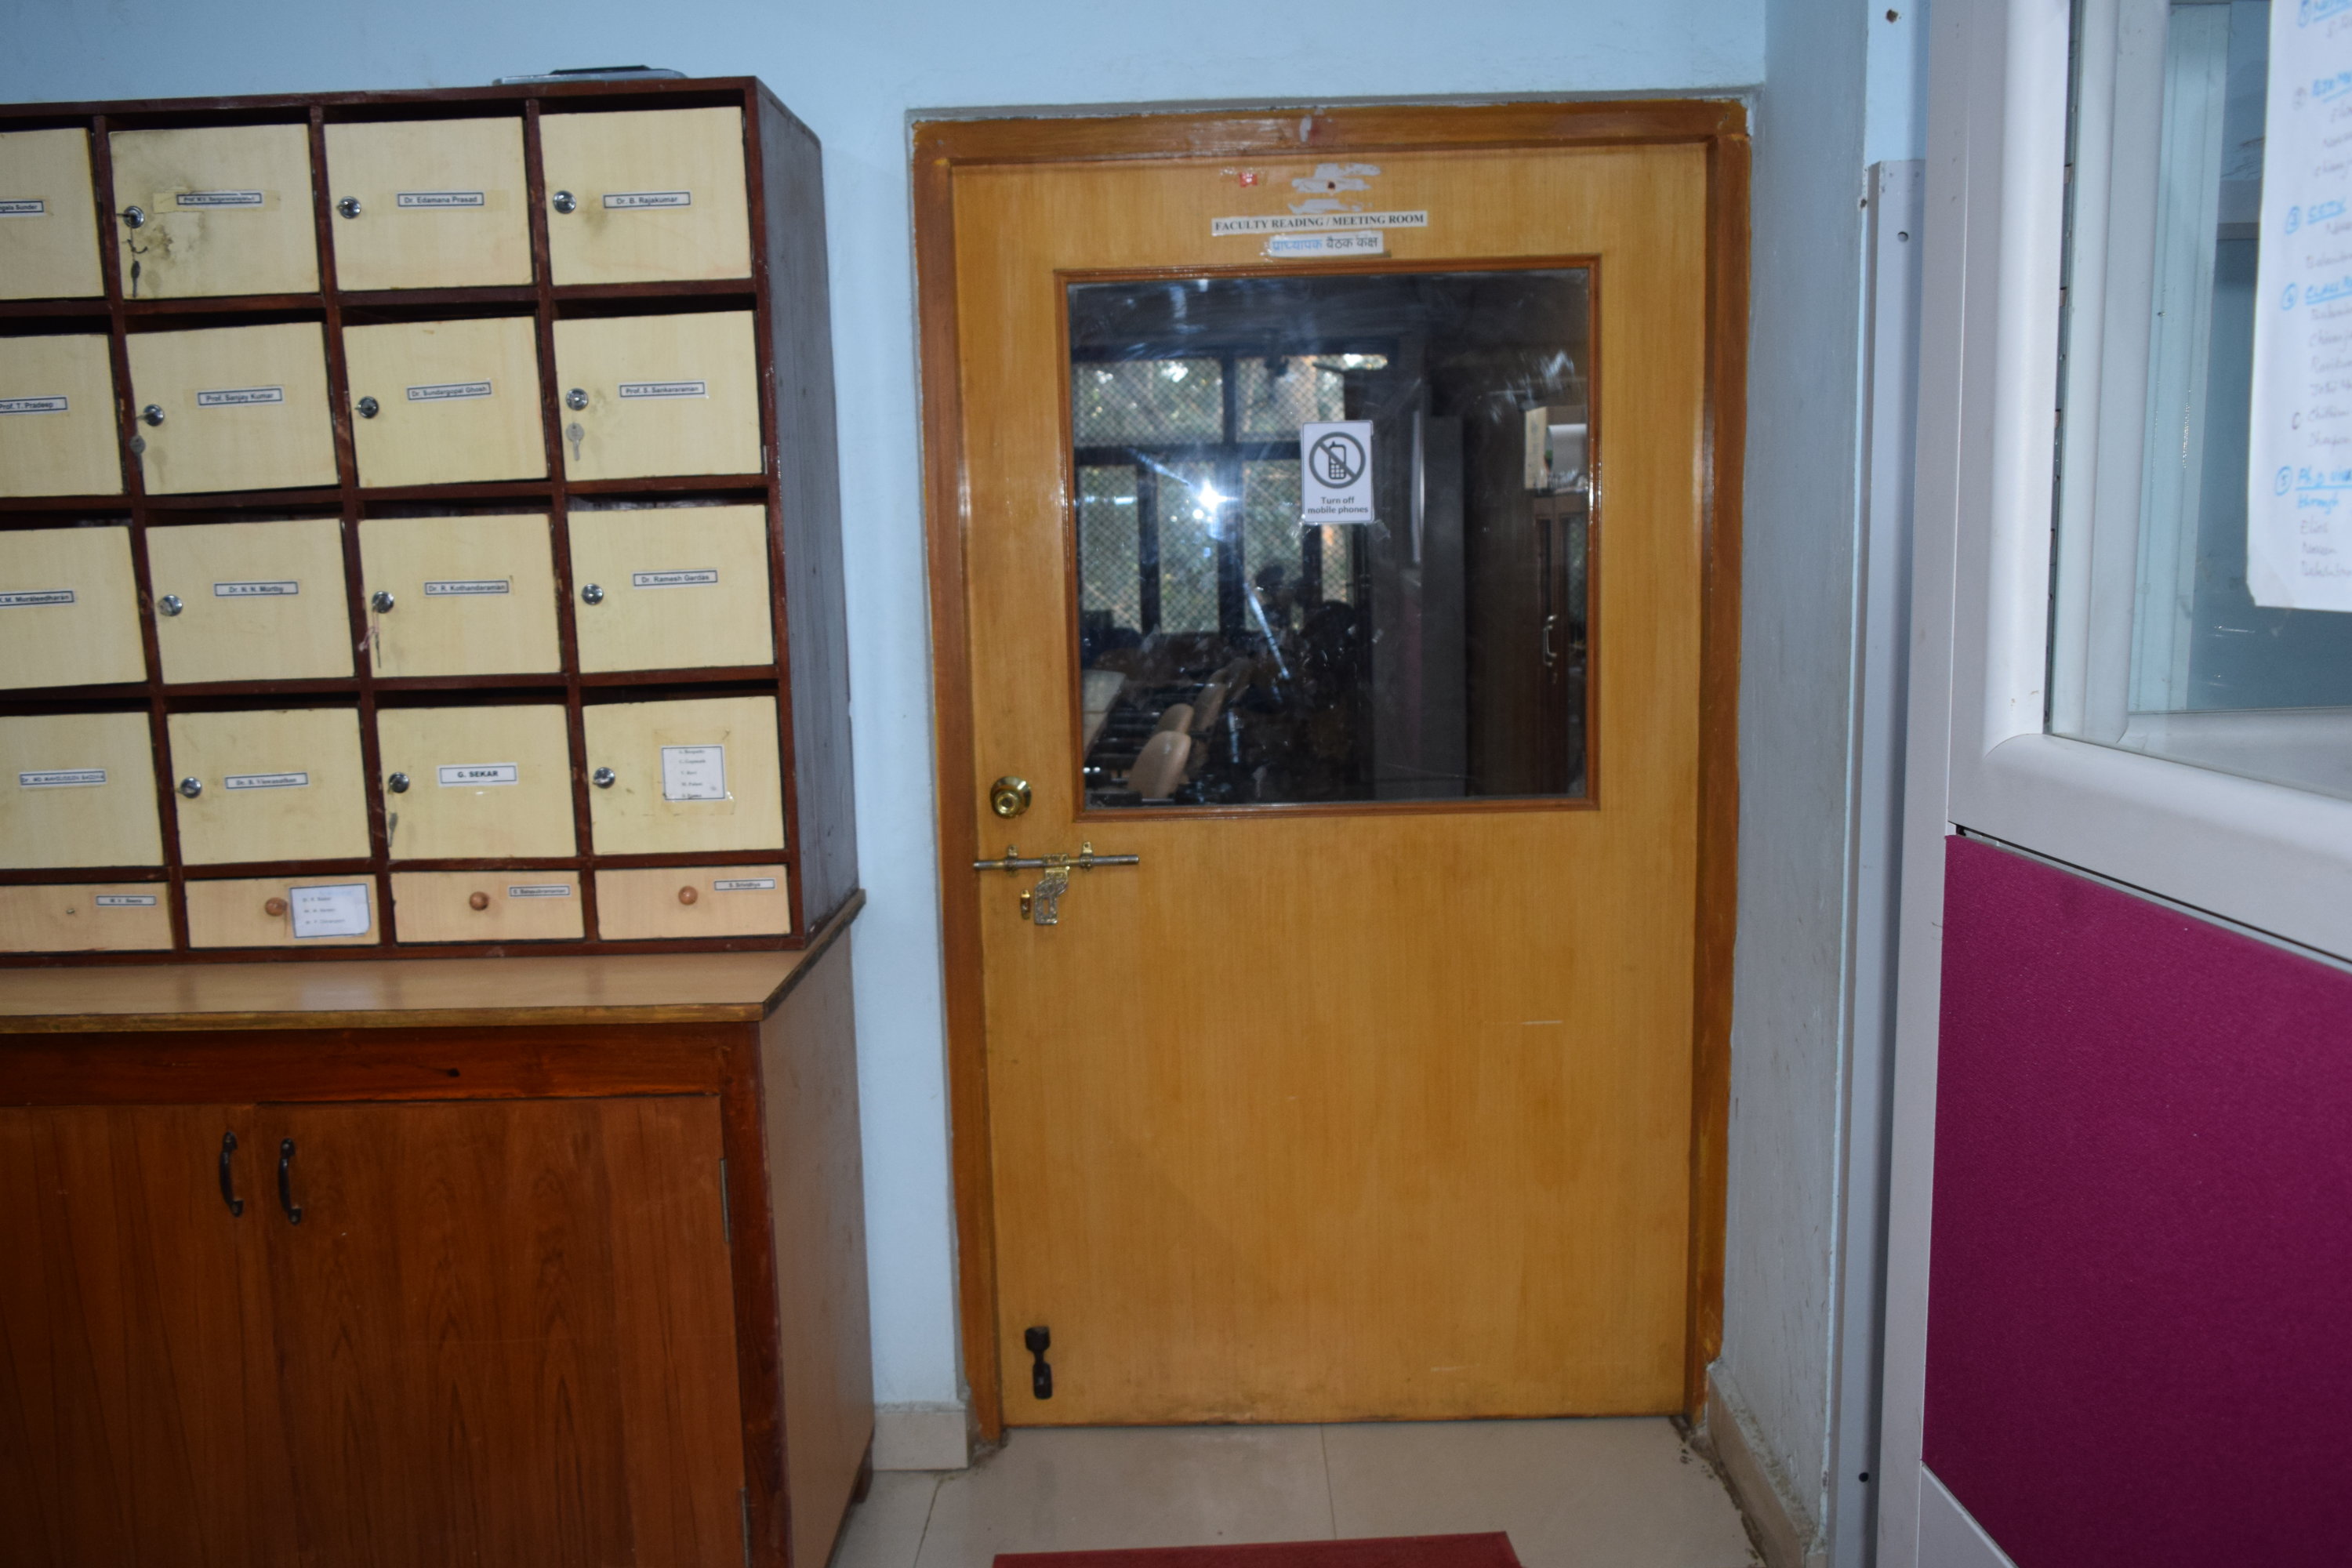 Conference Hall No. 210 in Department of Chemistry